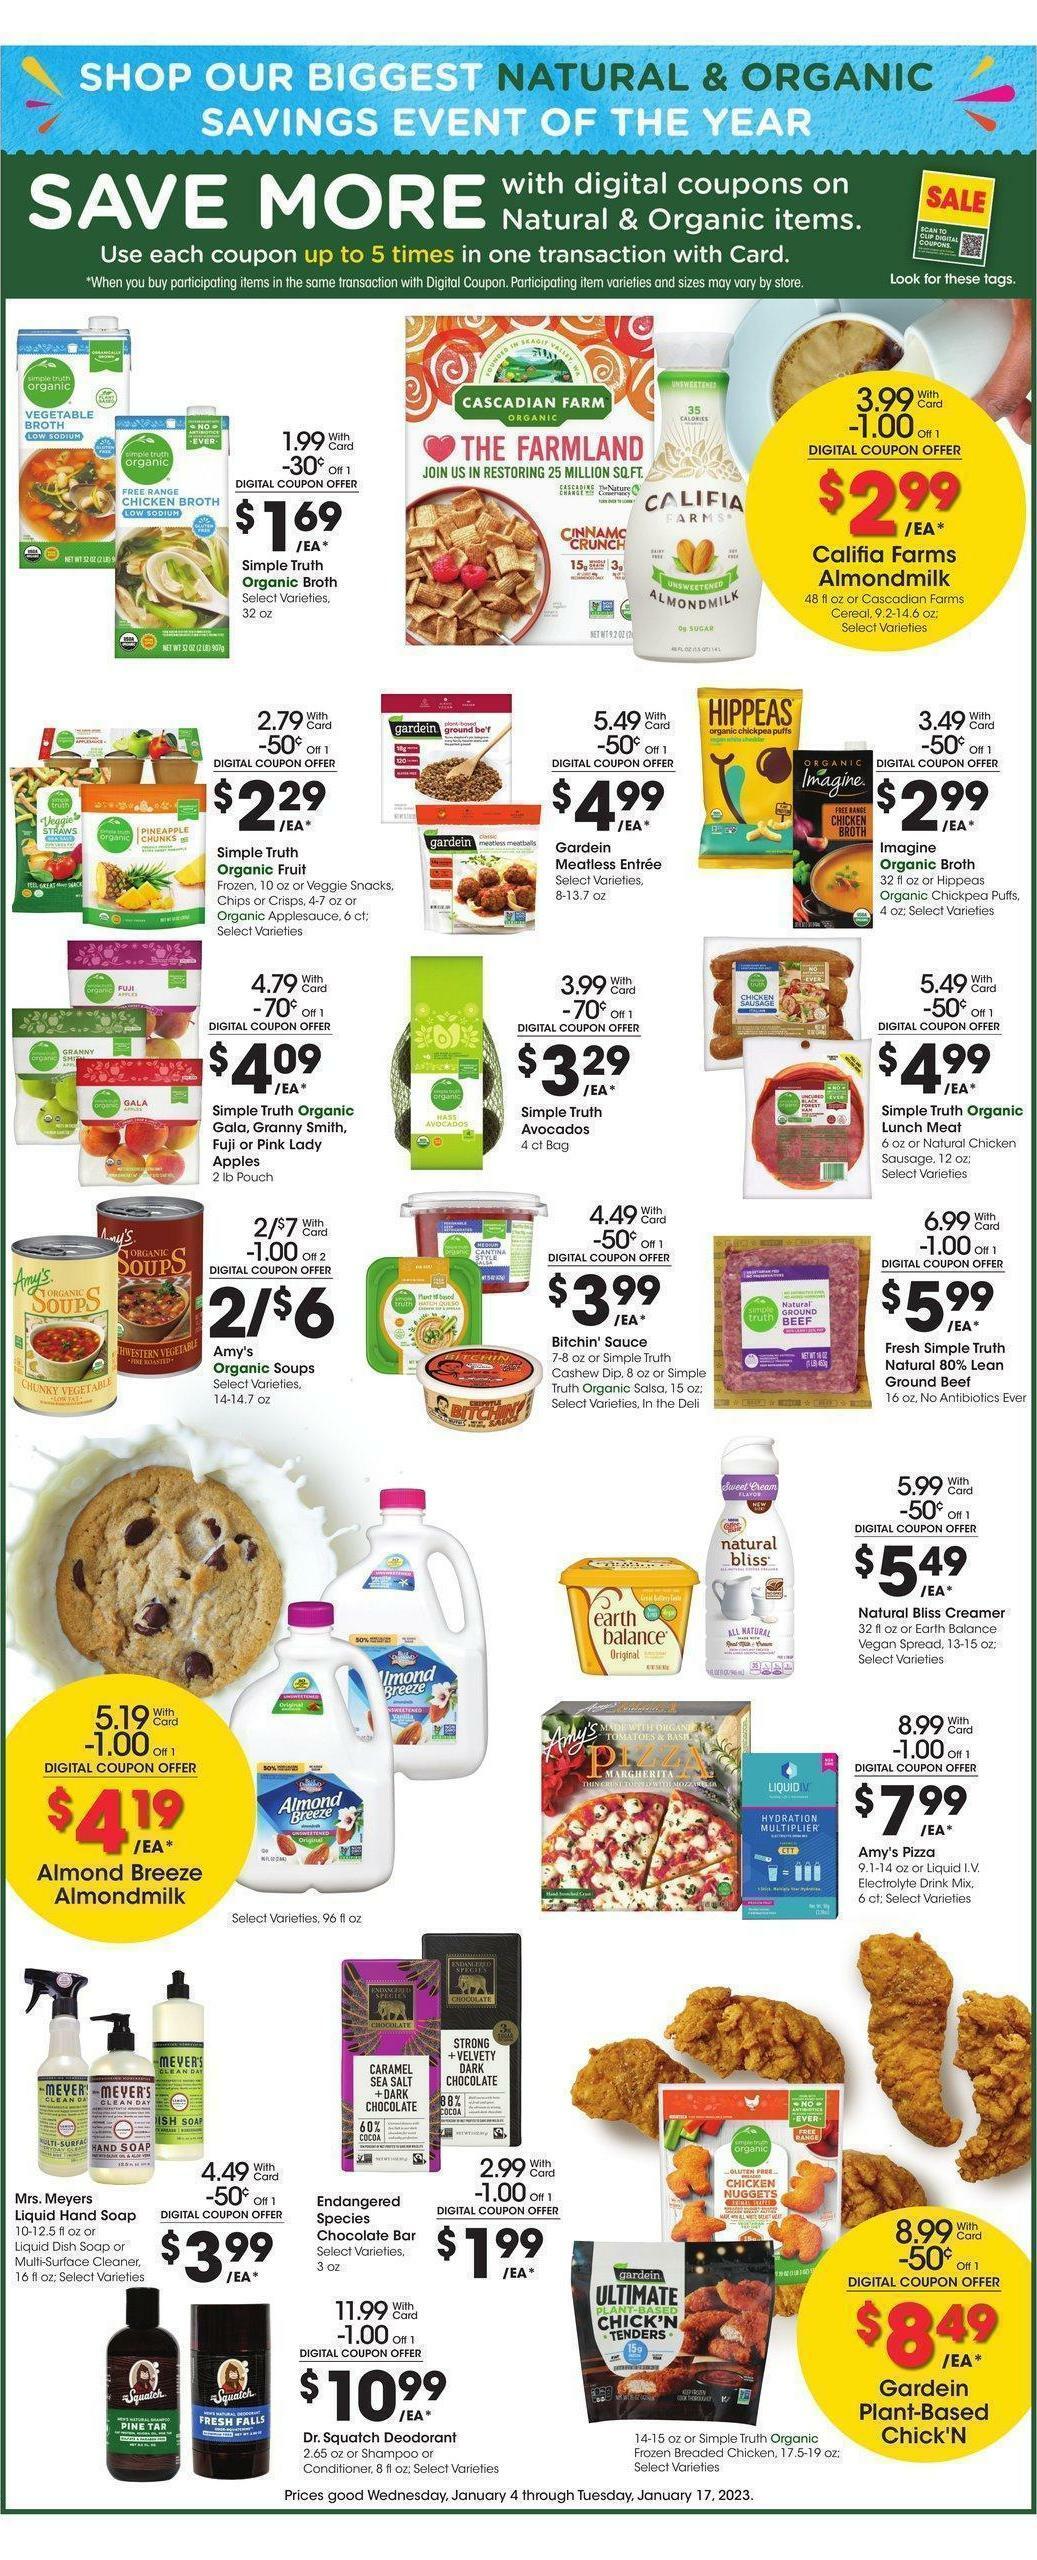 Kroger Weekly Ad from January 4